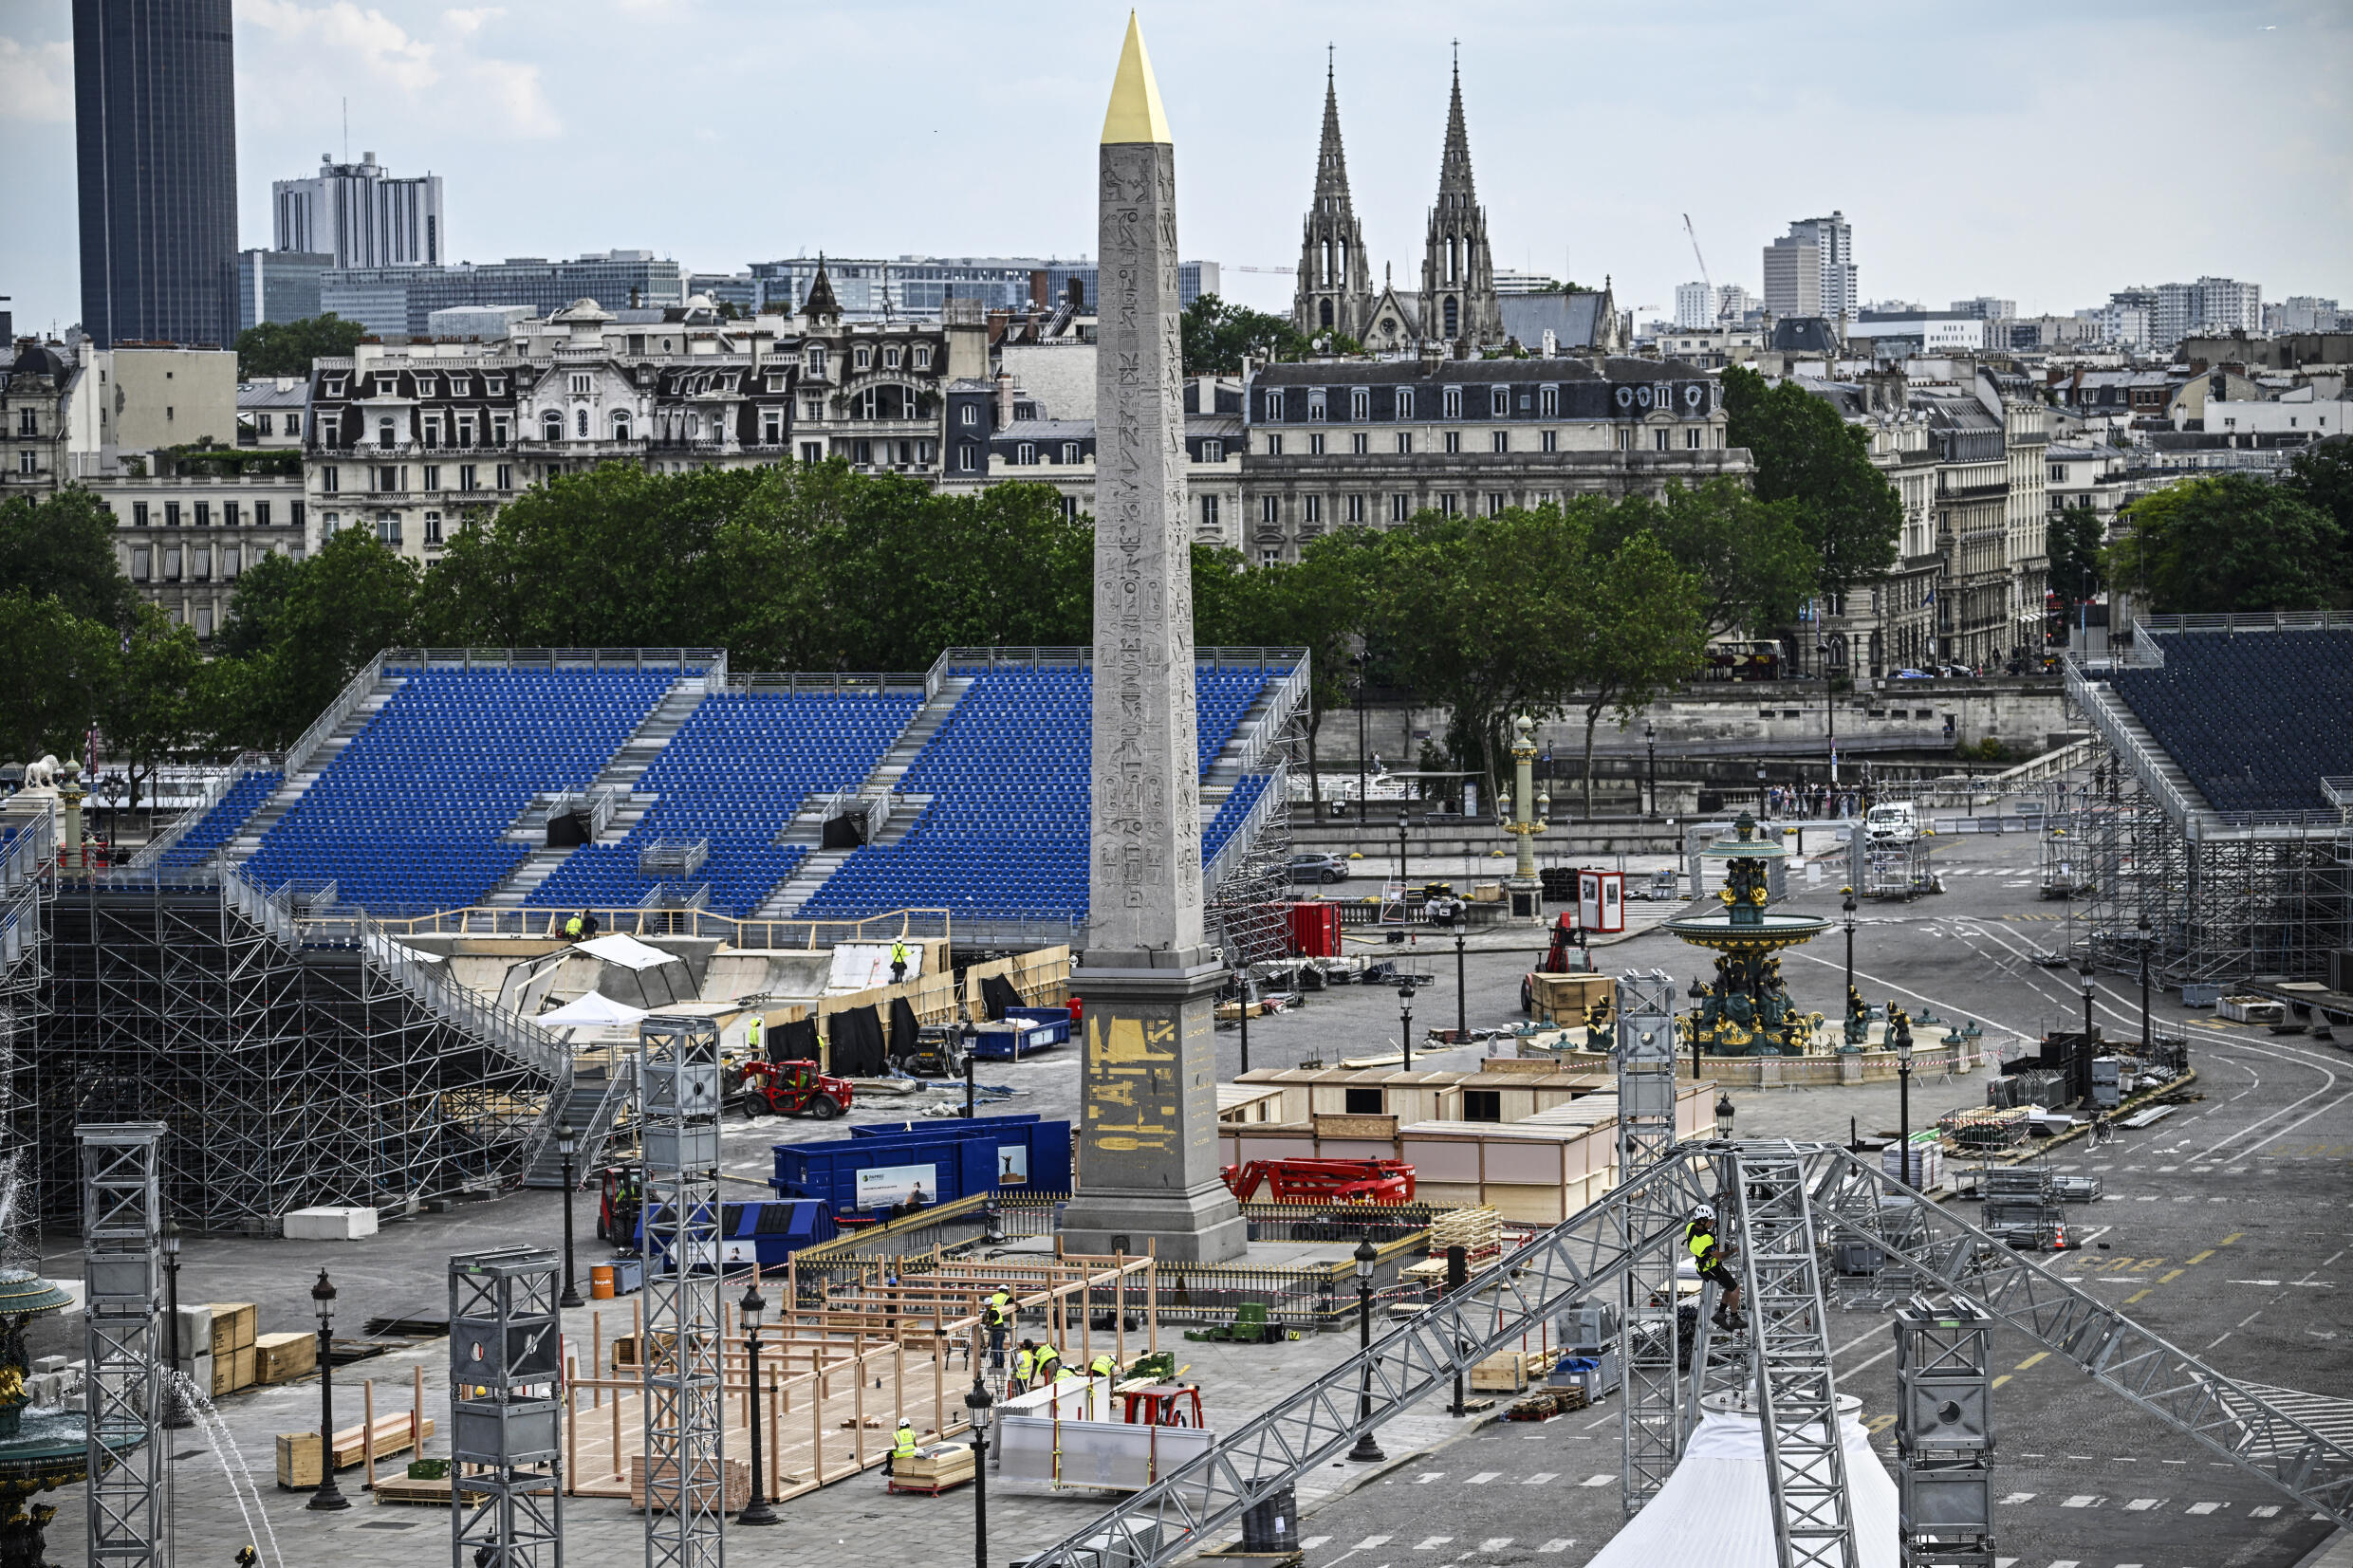 Place de la Concorde, the largest square in Paris, is closed "to all traffic" as it will host the urban sports events, as well as the opening ceremony of the Paralympic Games on 28 August, 2024.